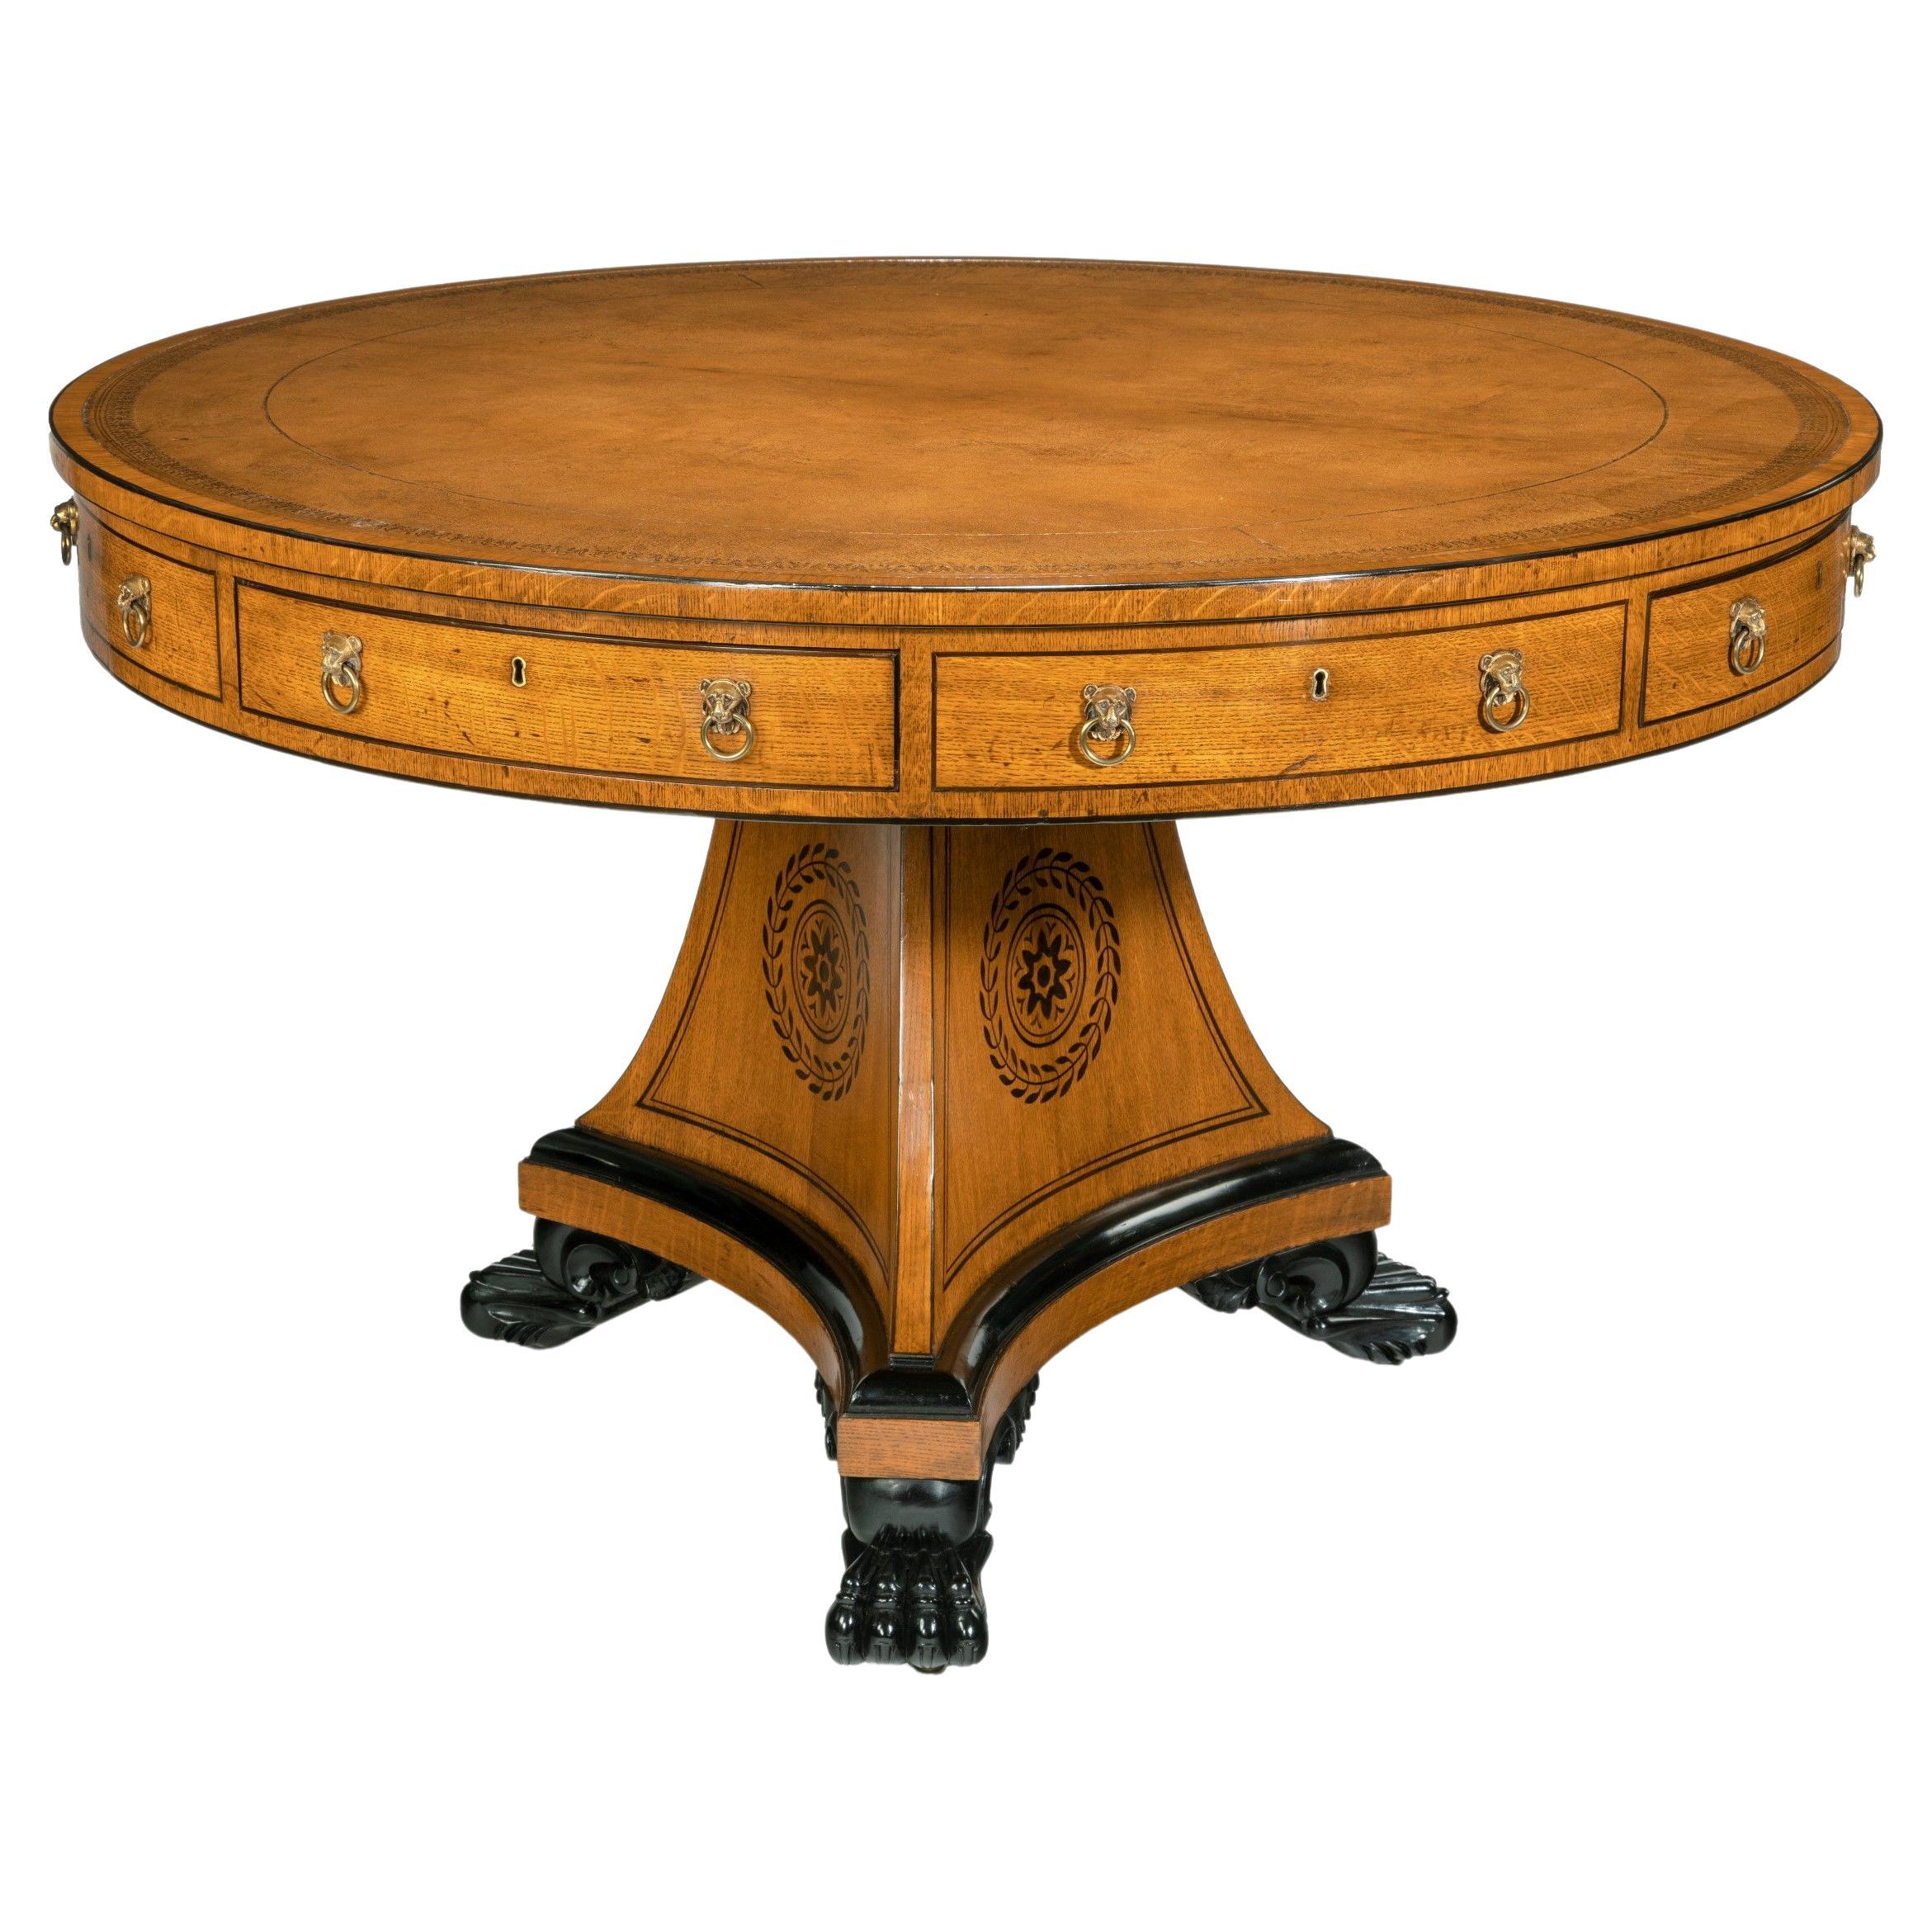 Important Regency Period Library Table Made After Designs by Thomas Hope For Sale